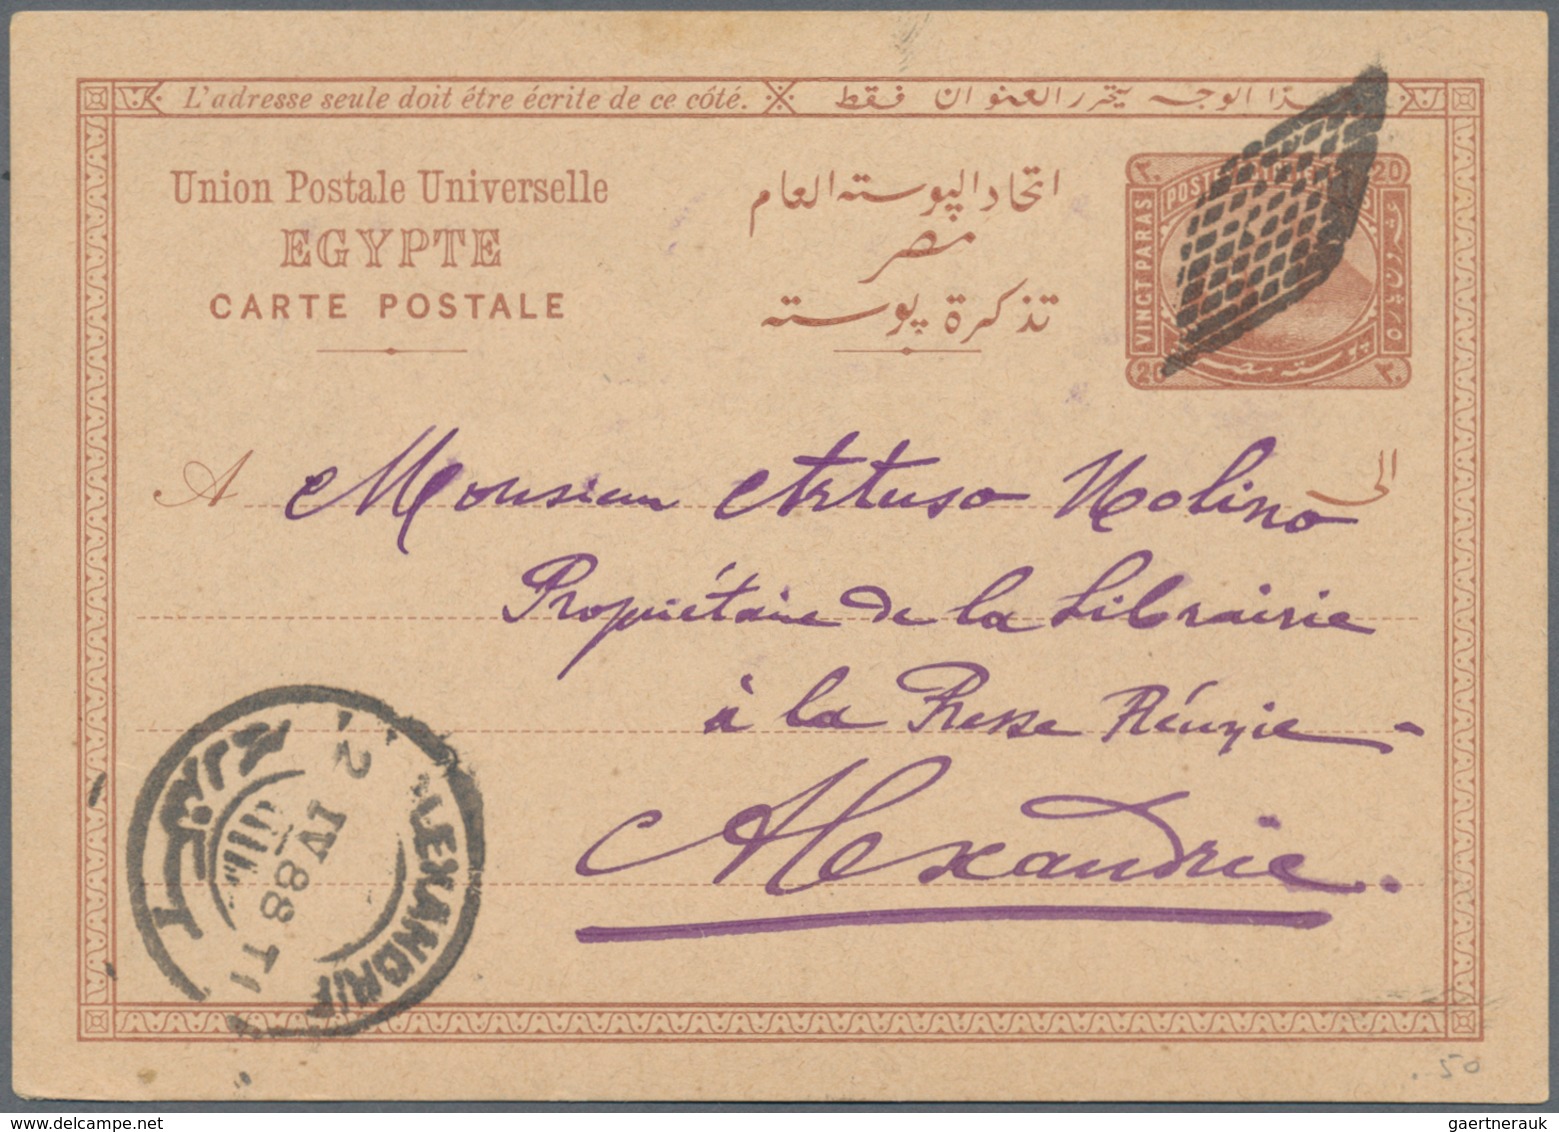 Ägypten - Stempel: 1866/1950 ca., 'RETTA' cancellations, comprehensive and valuable collection with